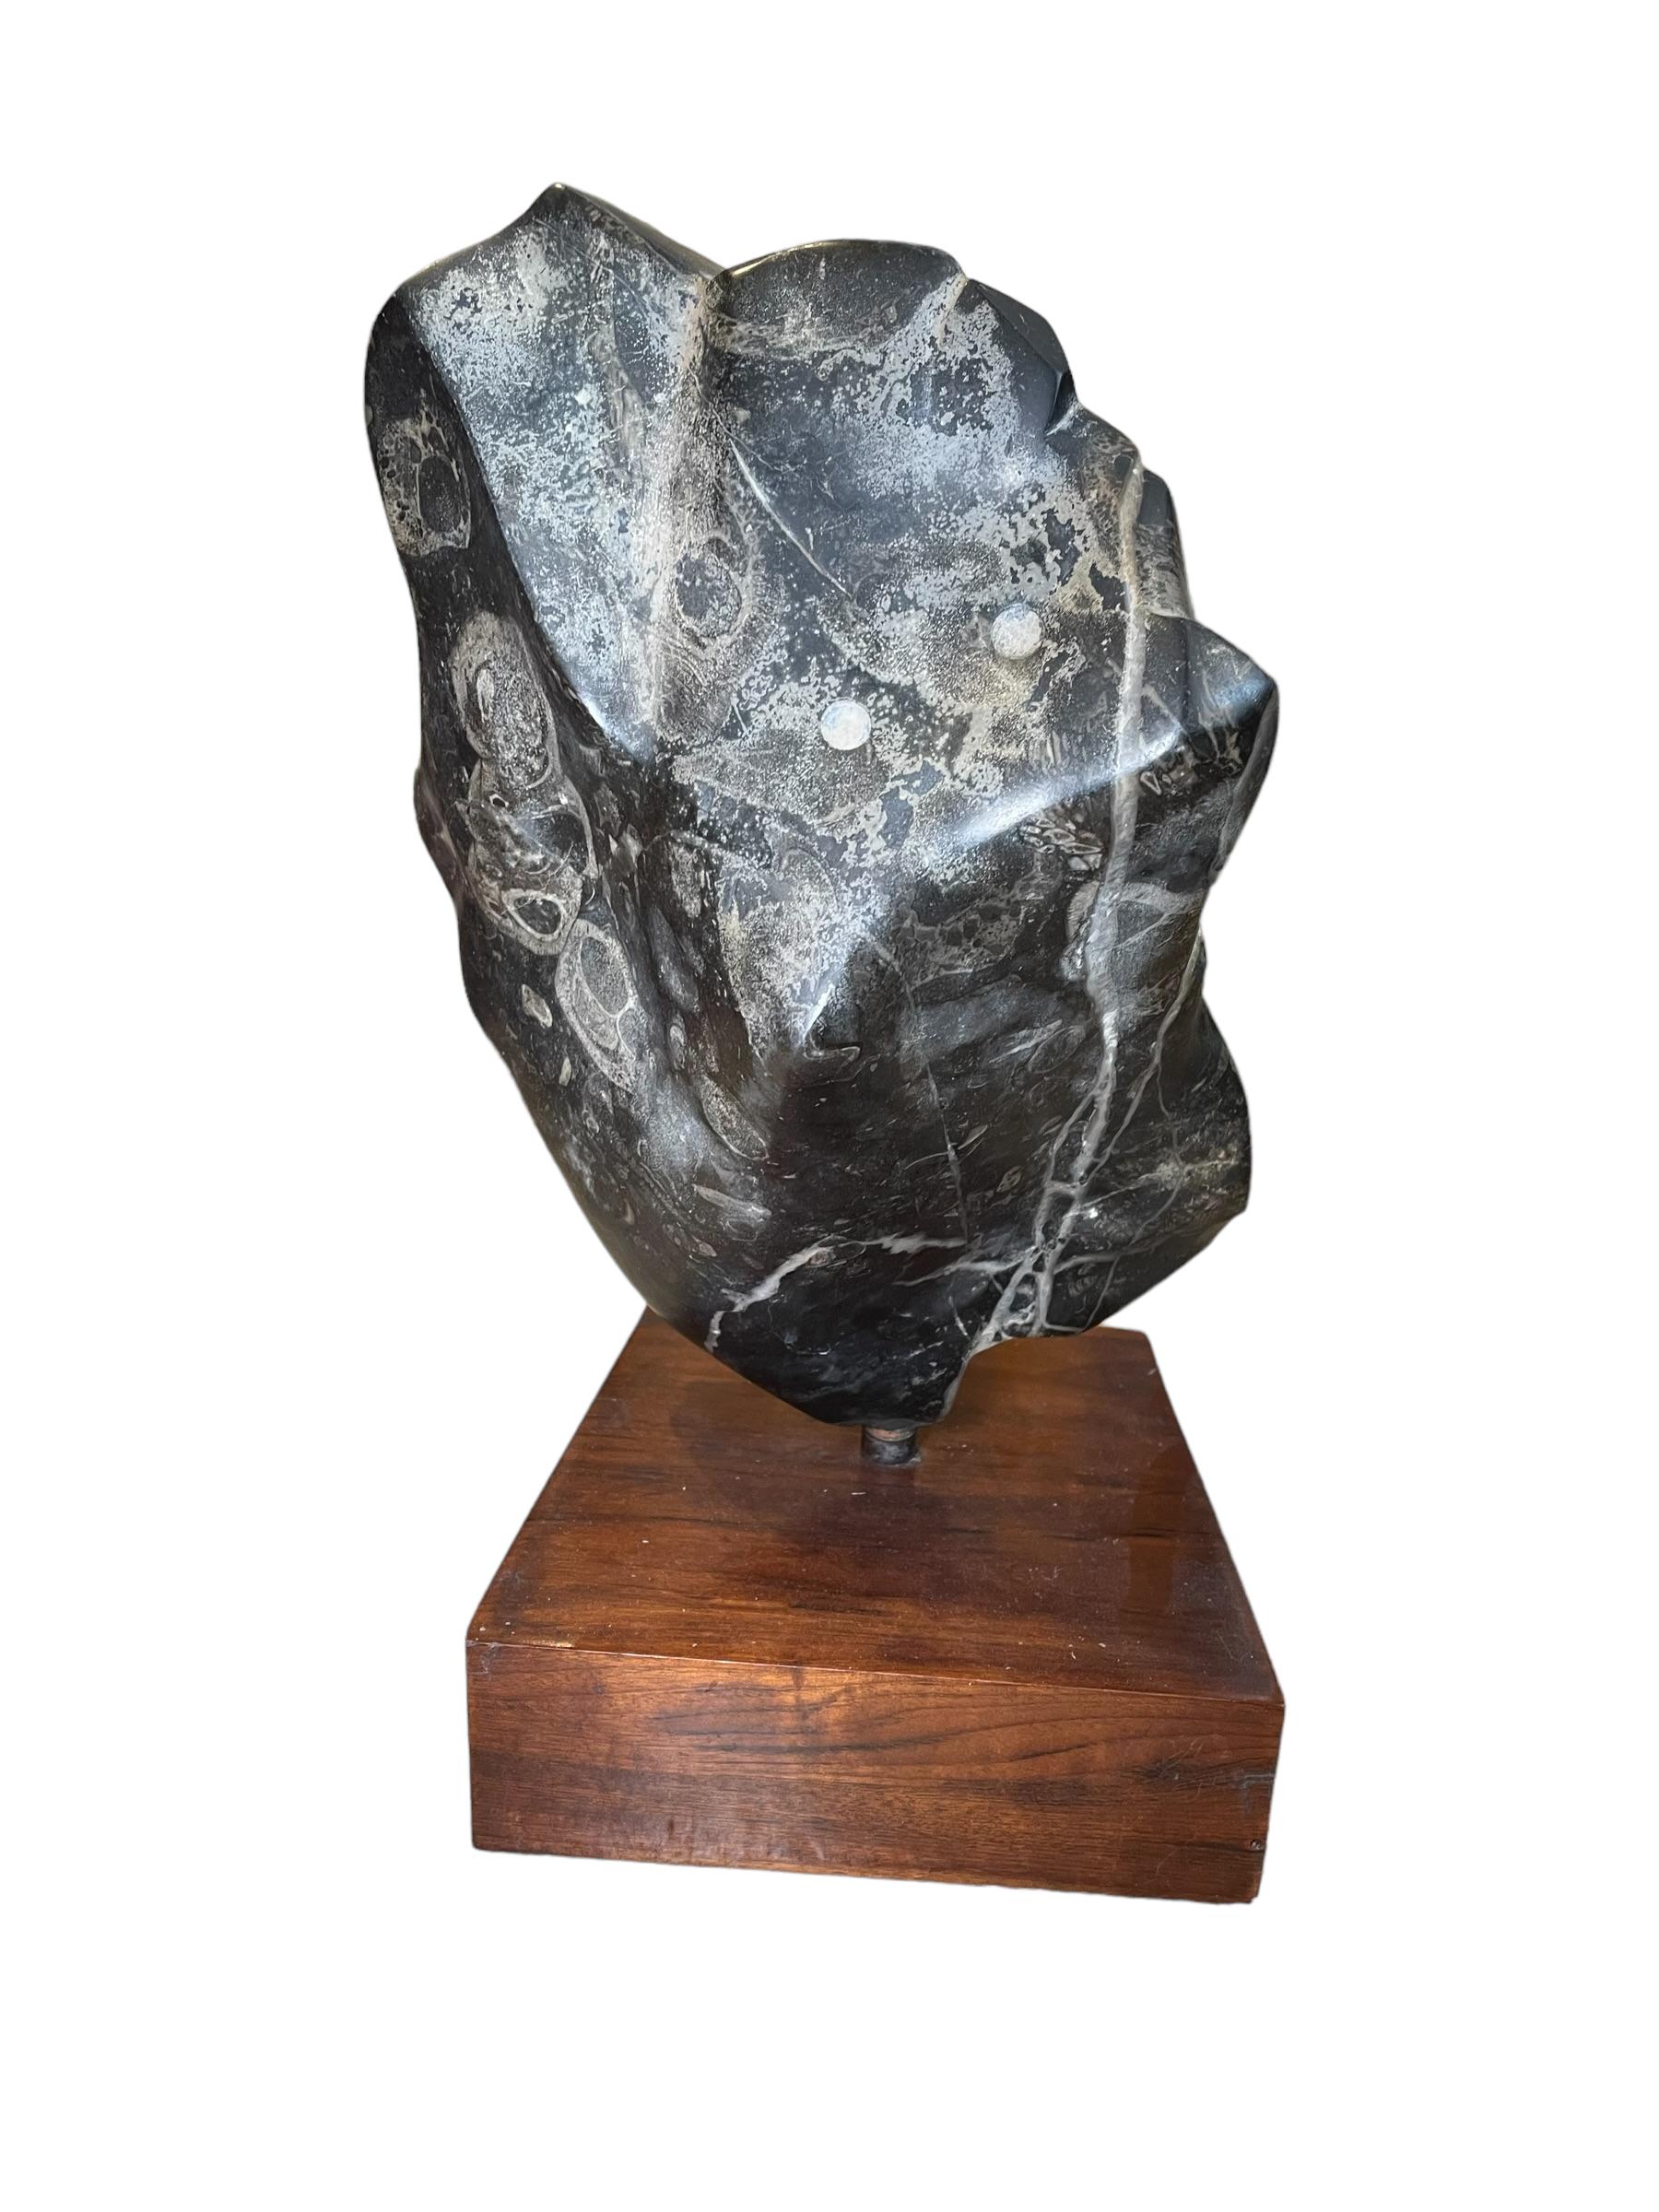 This is a 20th century Marble Sculpture. It depicts a black marble abstract sculpture supported by a rectangular wood base. It was made by a Puerto Rican sculptor named G.Nunez.